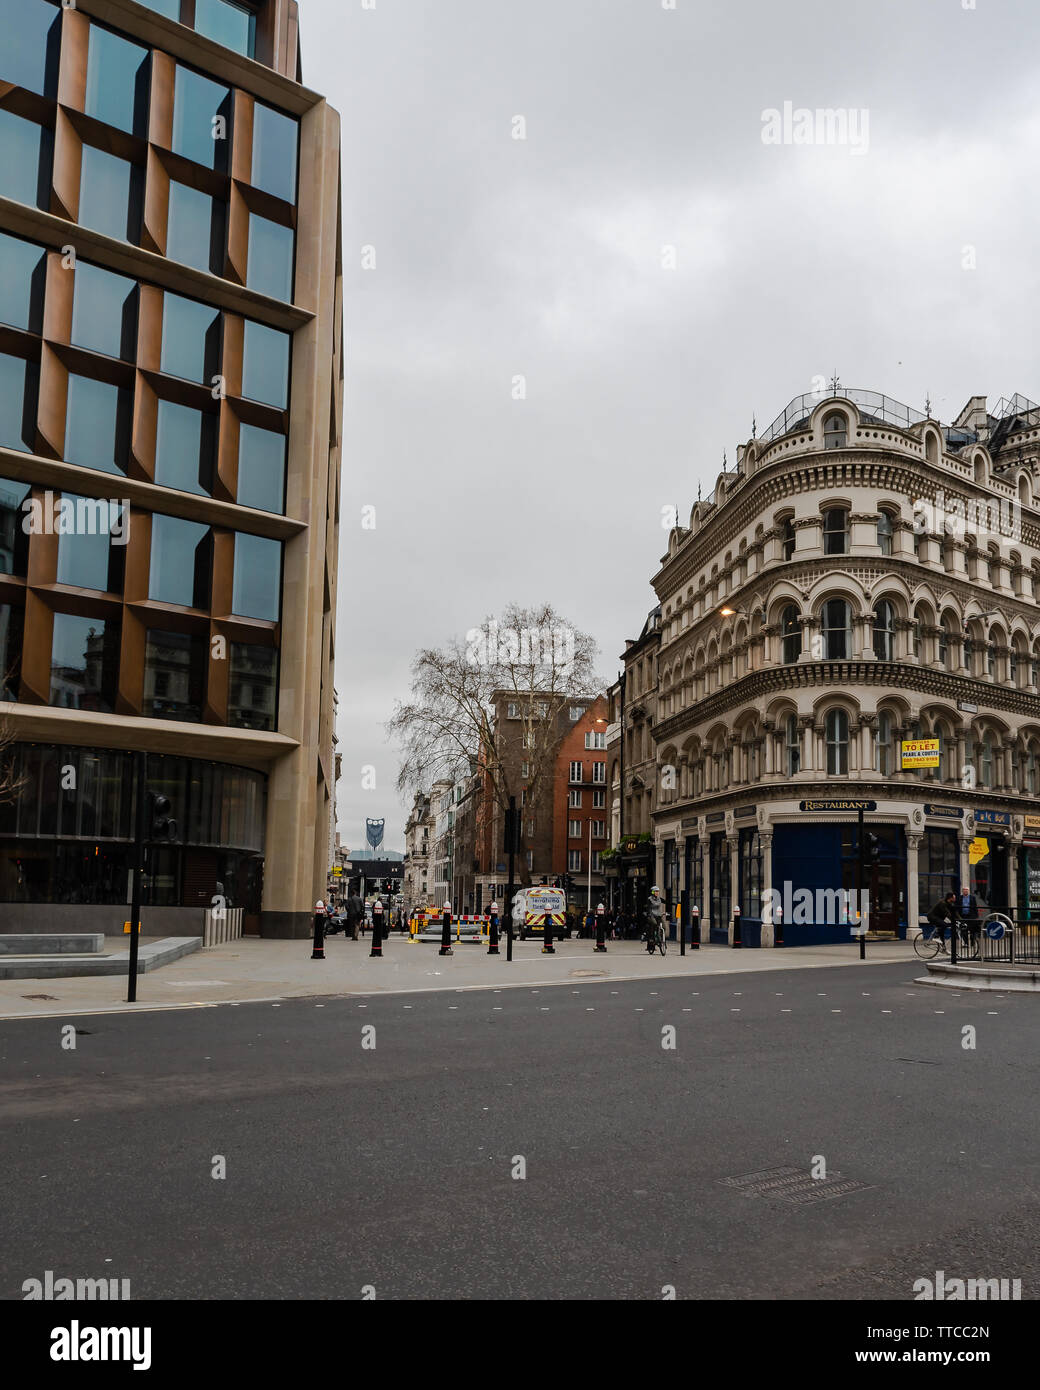 London - The City - March 20, 2019 Stock Photo